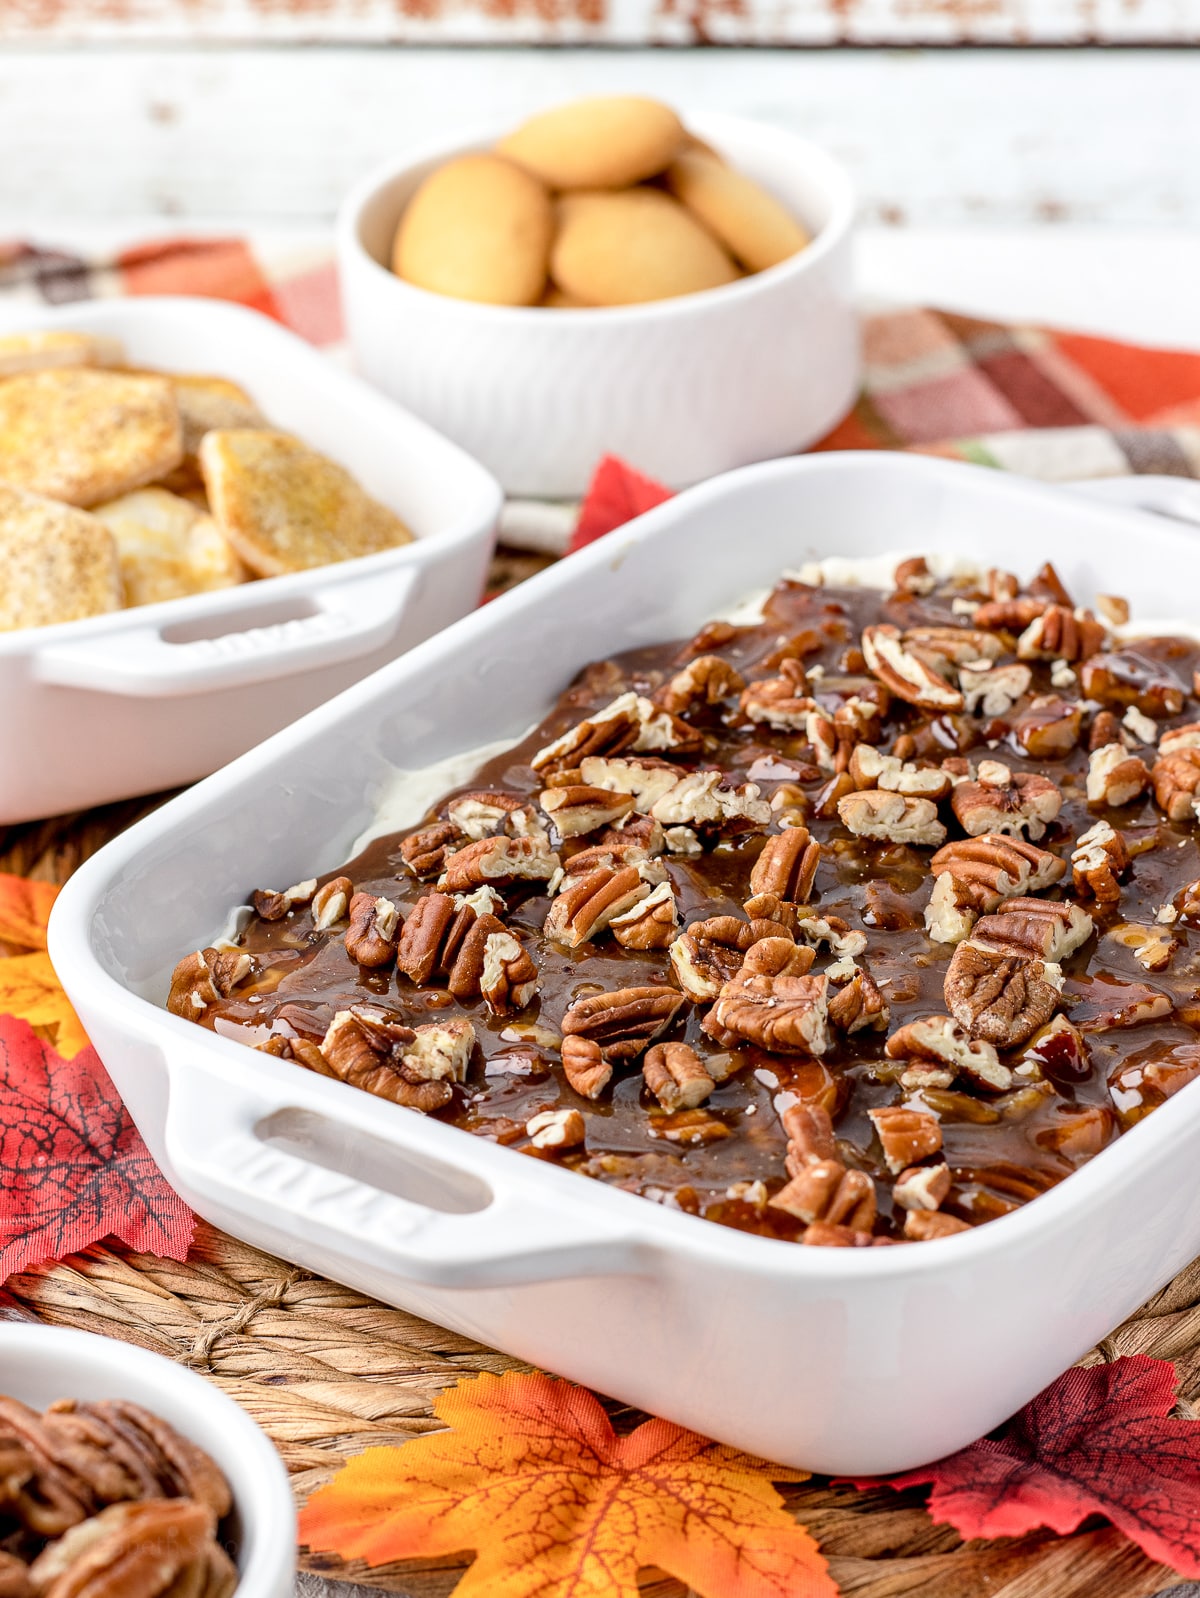 Pecan Pie Dip surrounded by pie crust chips, Nilla wafers, pecans, fall leaves.